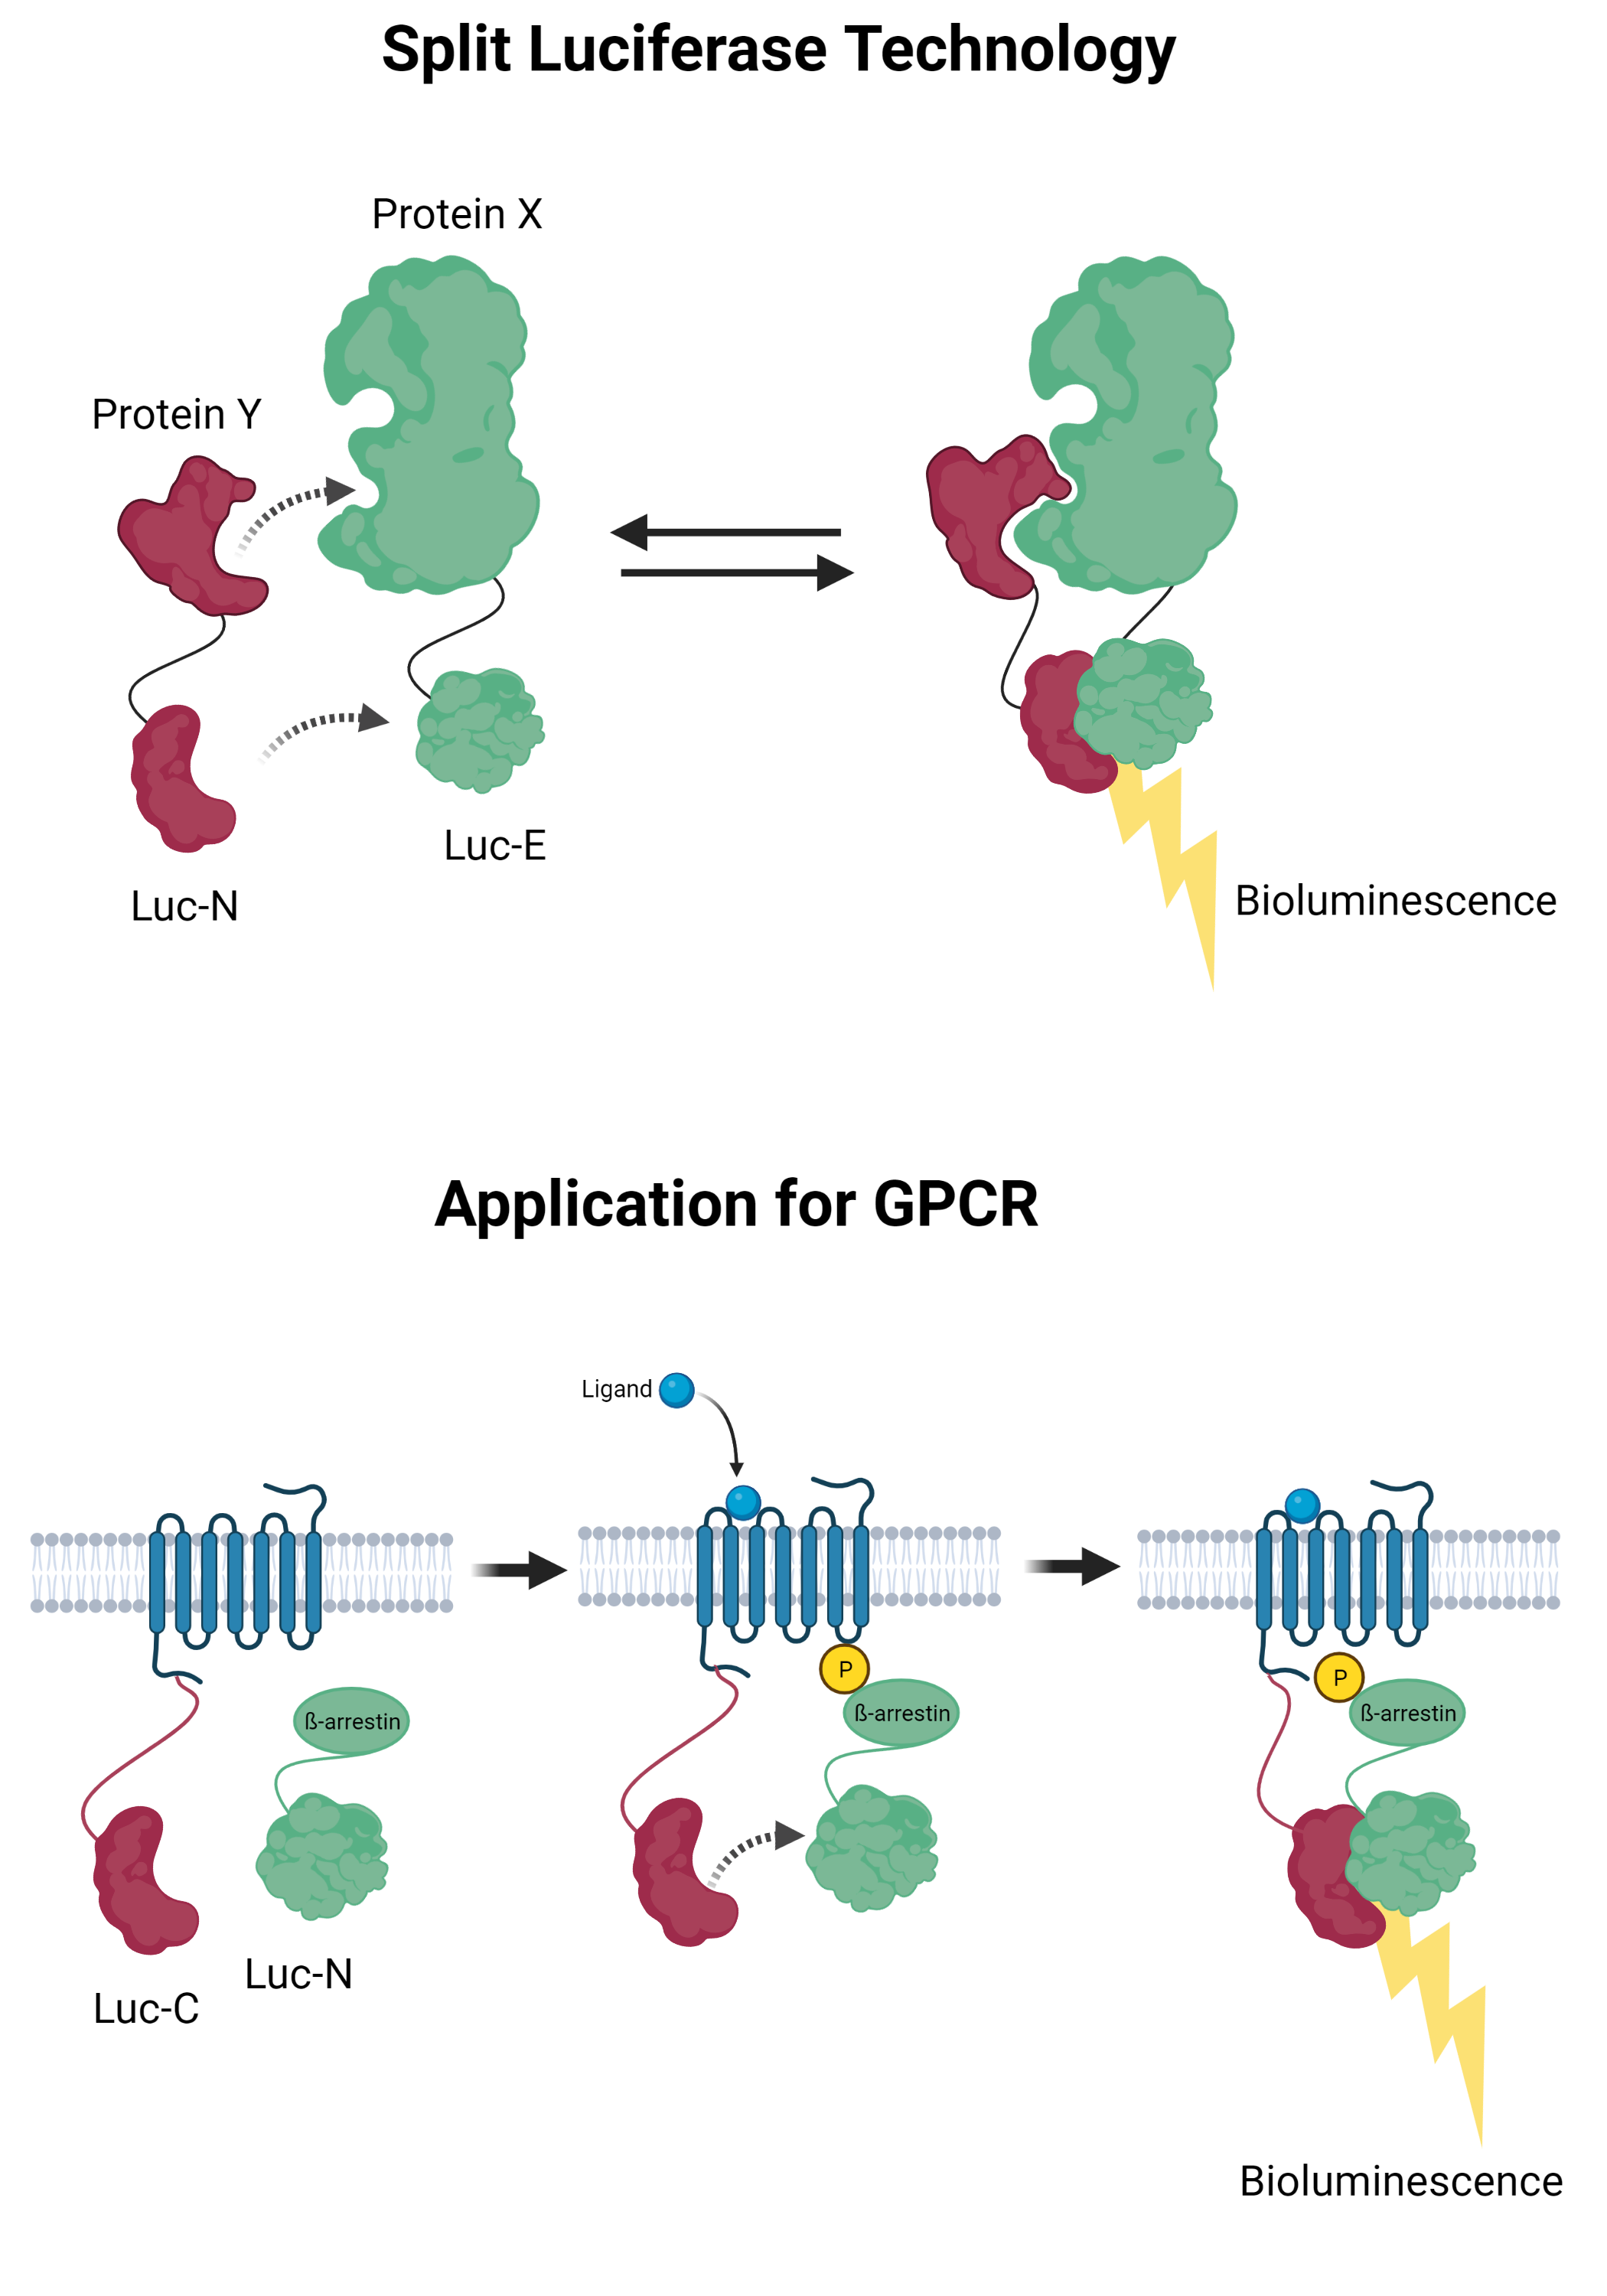 Schematic overview of function and use of split luciferase technology